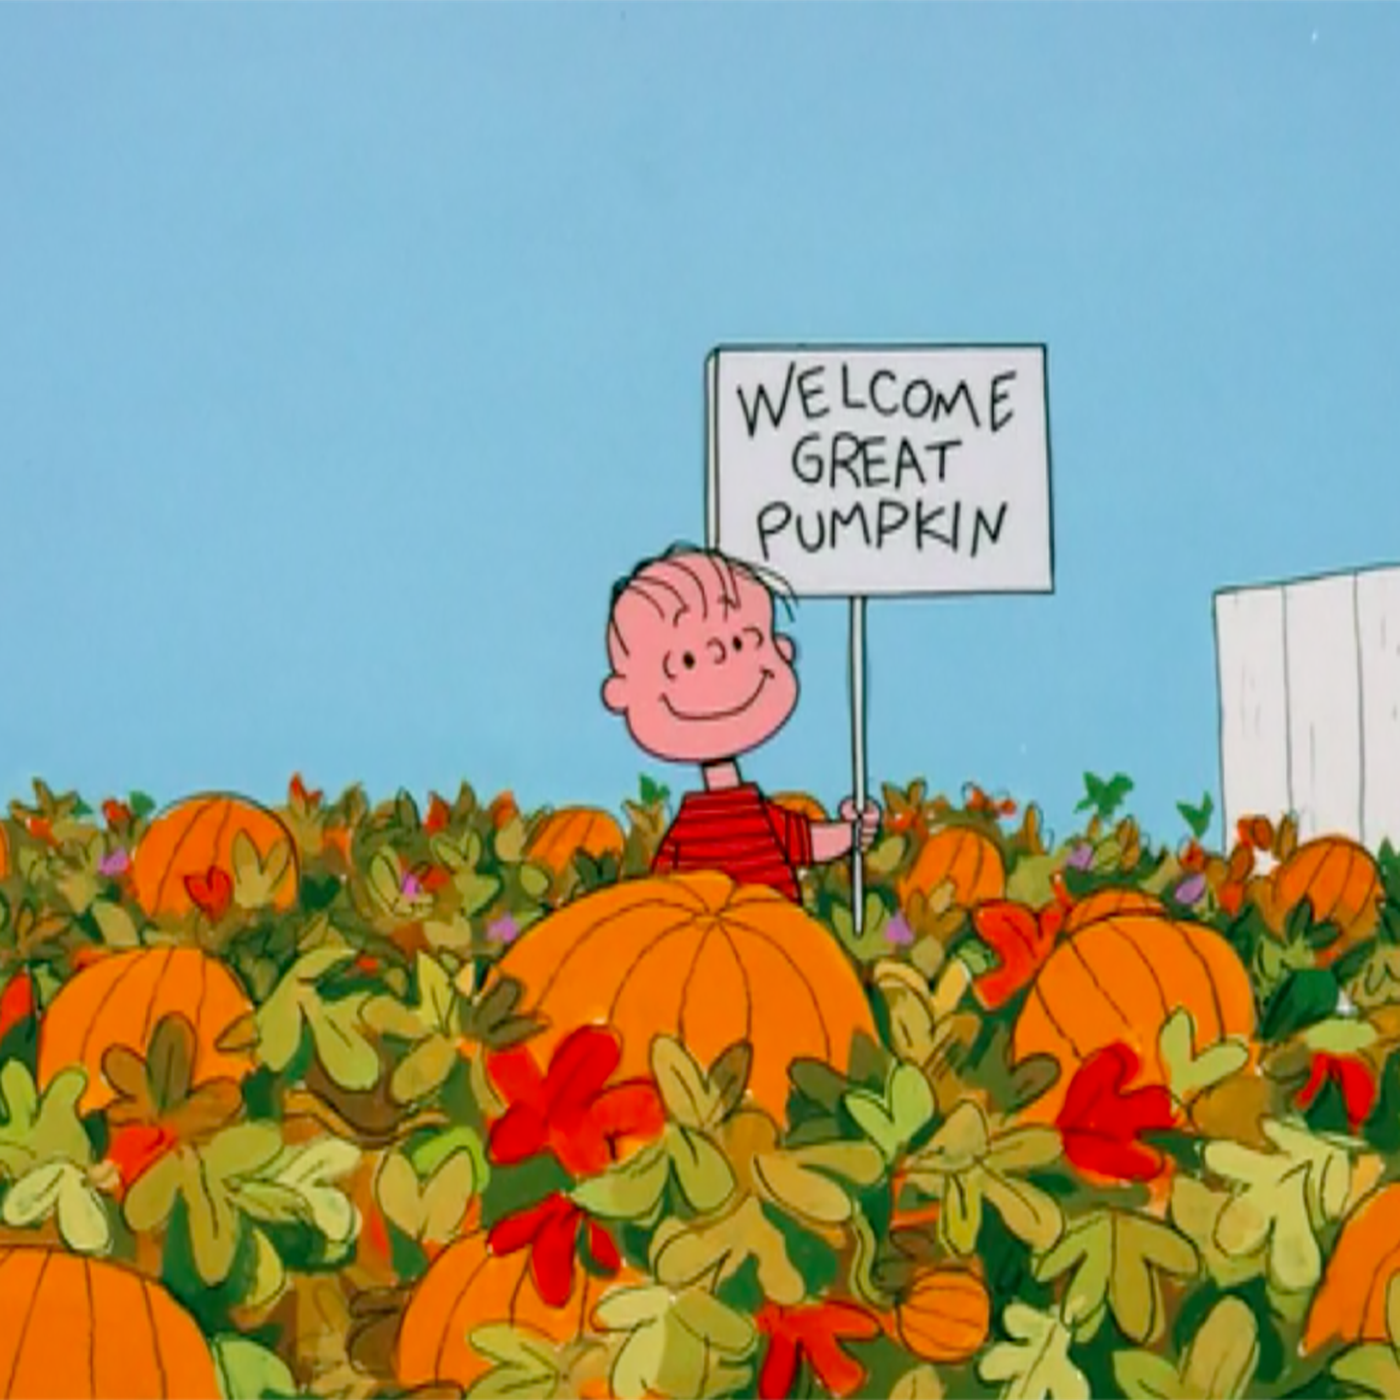 It's the Great Pumpkin, Charlie Brown is a Christmas special wearing a Halloween costume